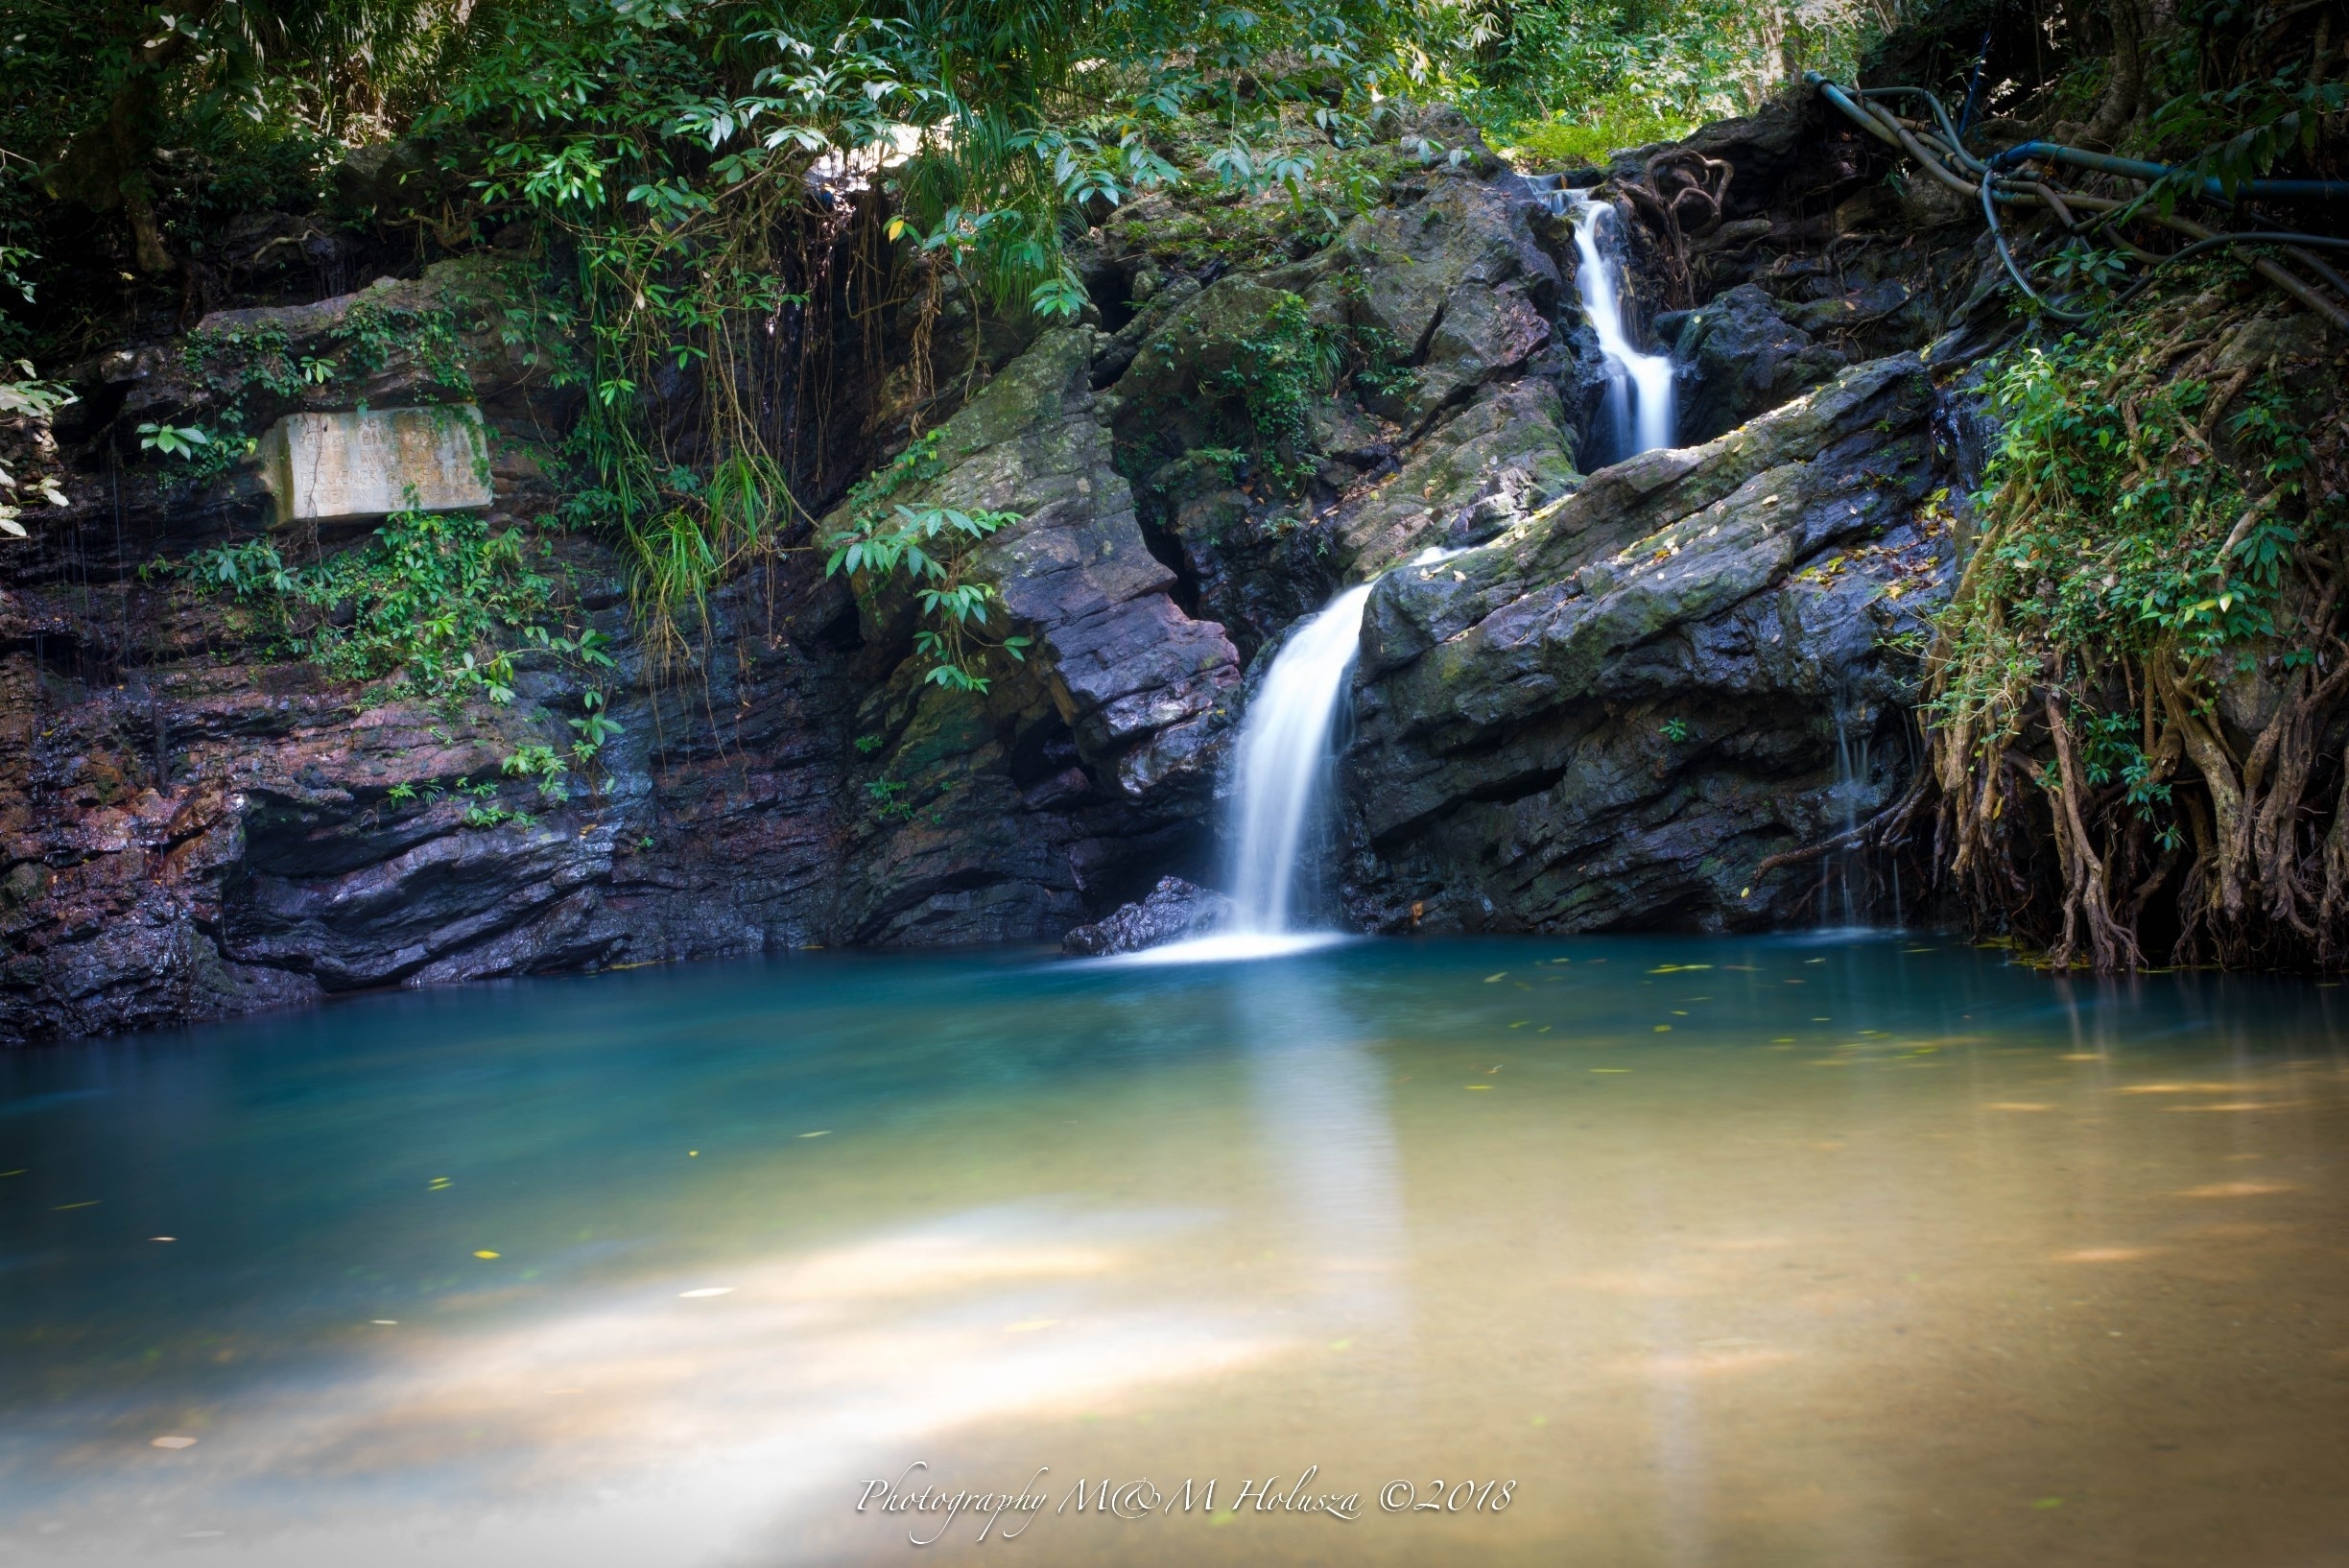 Driving away from Coron... find a Concepcion Falls, fresh spring water, quite chilly but fantastic. Take care coz you need to park on the street and than take a forest path to water falls.
For full story please visit our blog 
https://photographymmholusza.wordpress.com/2018/01/03/first-blog-post/